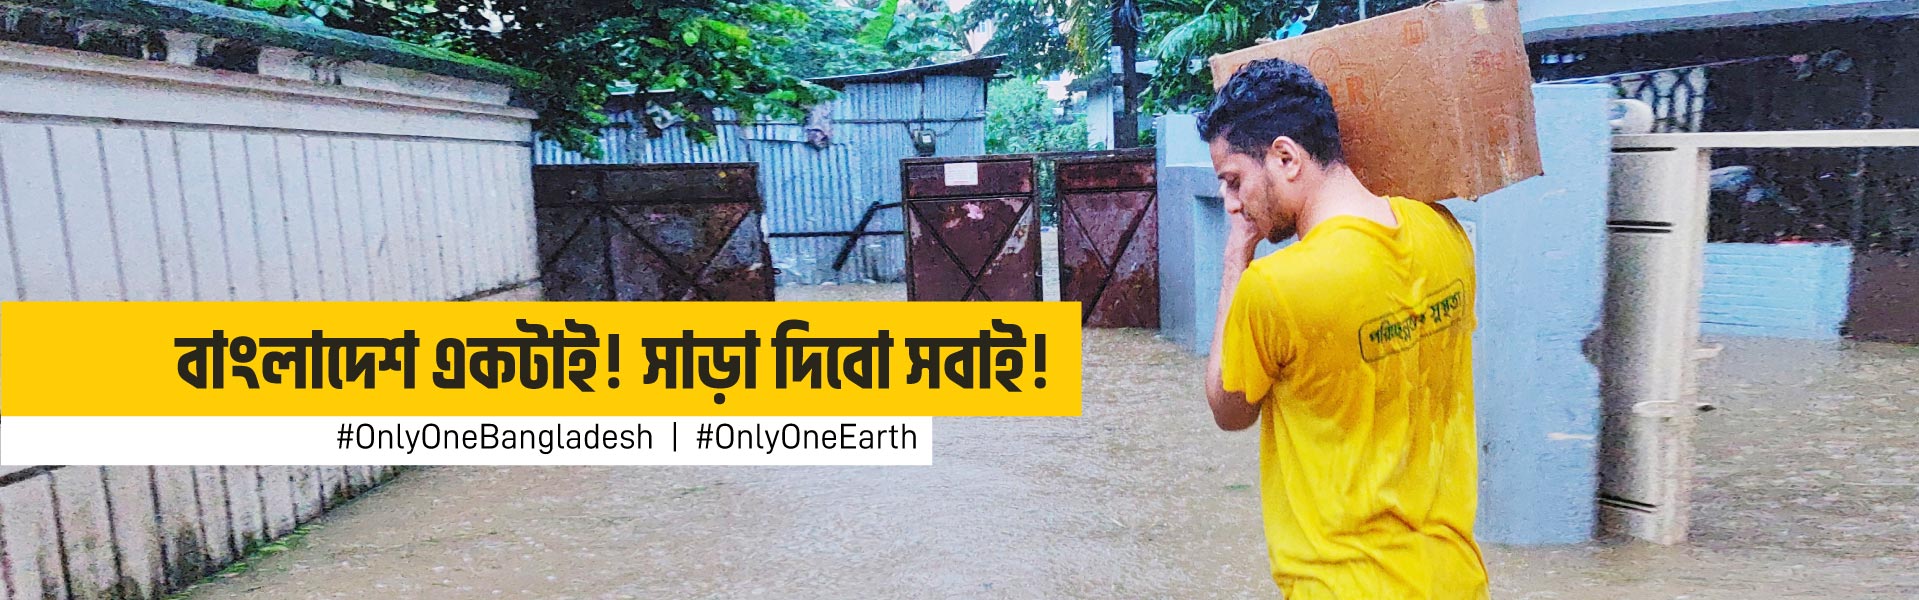 Only One Earth, Only One Bangladesh